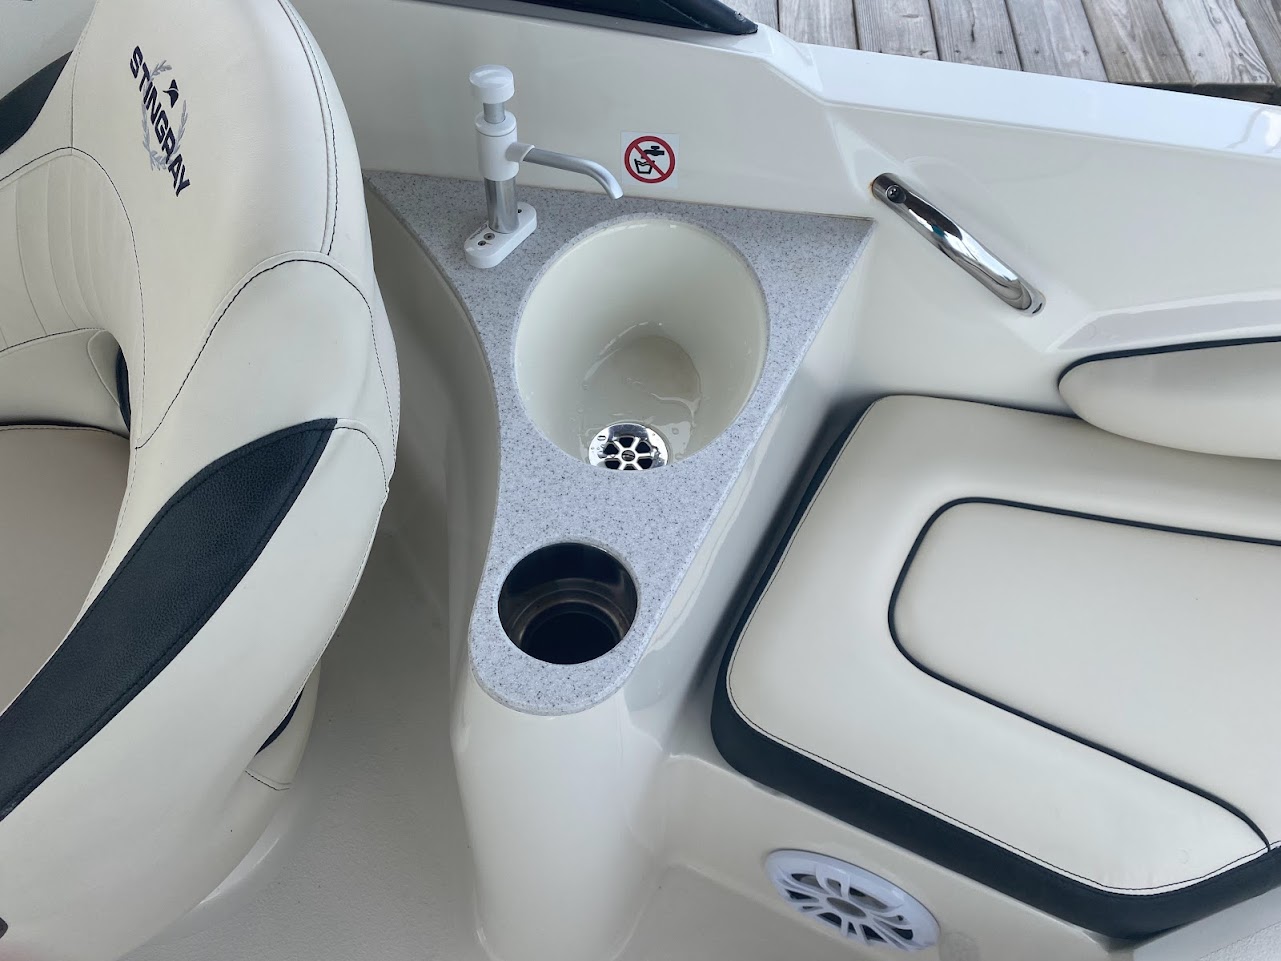 2022 Stingray 201DC Power boat for sale in Palm Coast, FL - image 9 